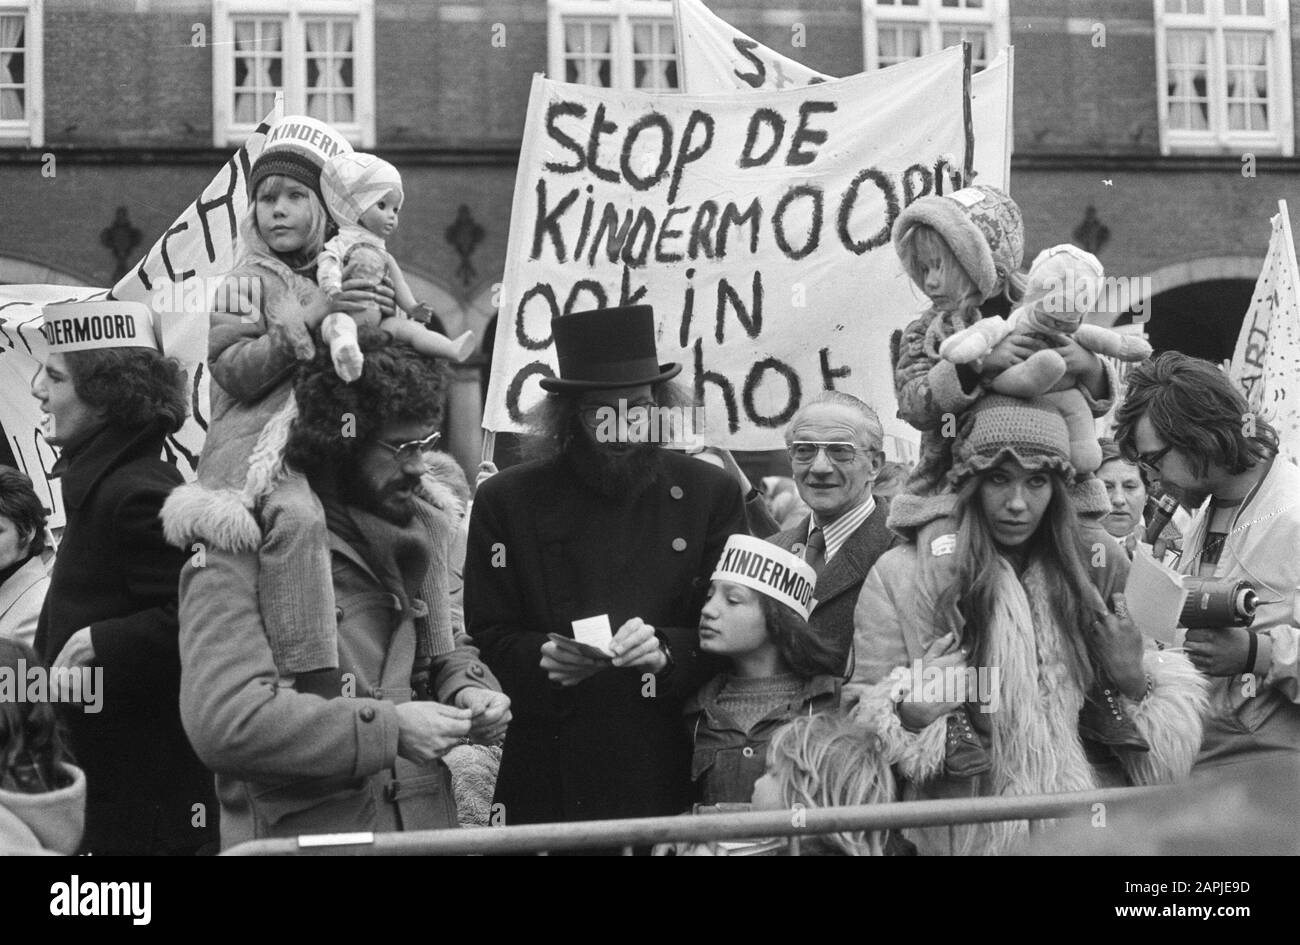 Demonstration action group Stop the Child murder at the Binnenhof Description: Protesters with banners Date: February 6, 1974 Location: The Hague, Zuid-Holland Keywords: actions, demonstrations, banners Stock Photo